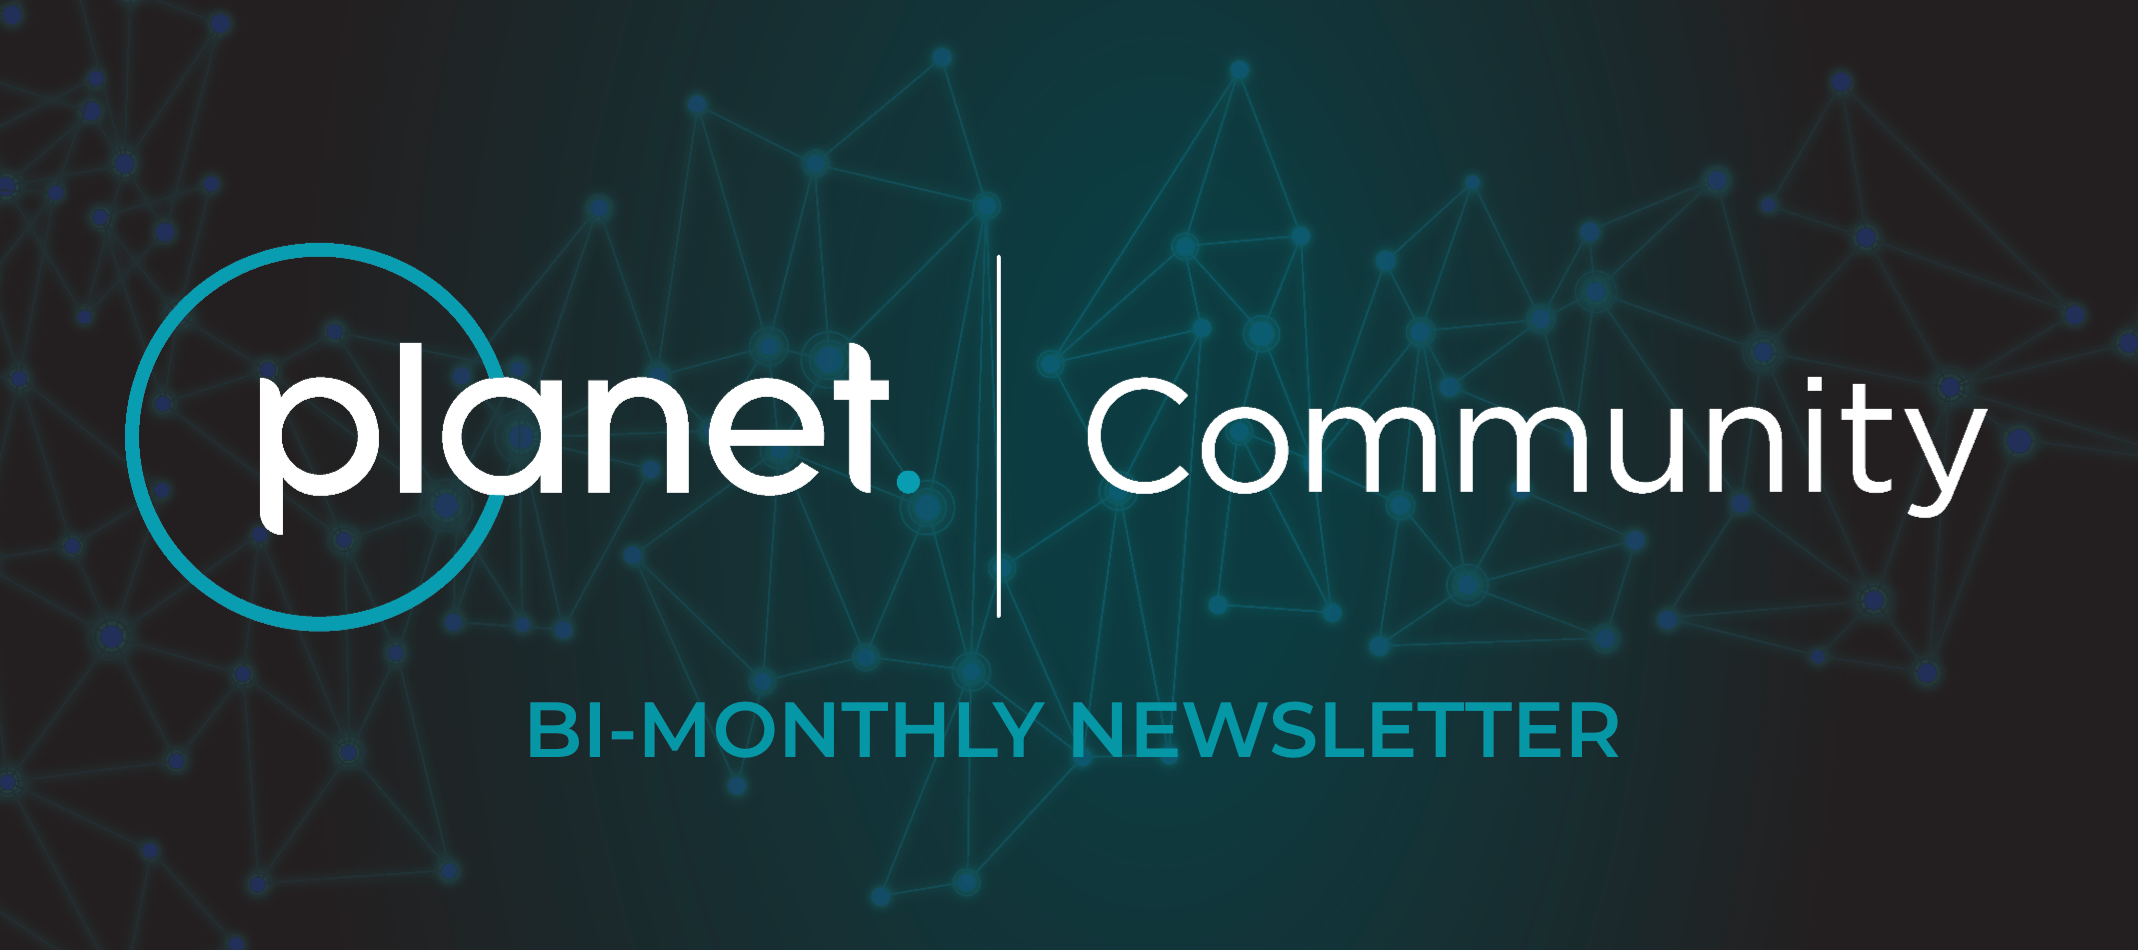 Introducing the Planet Community Newsletter!